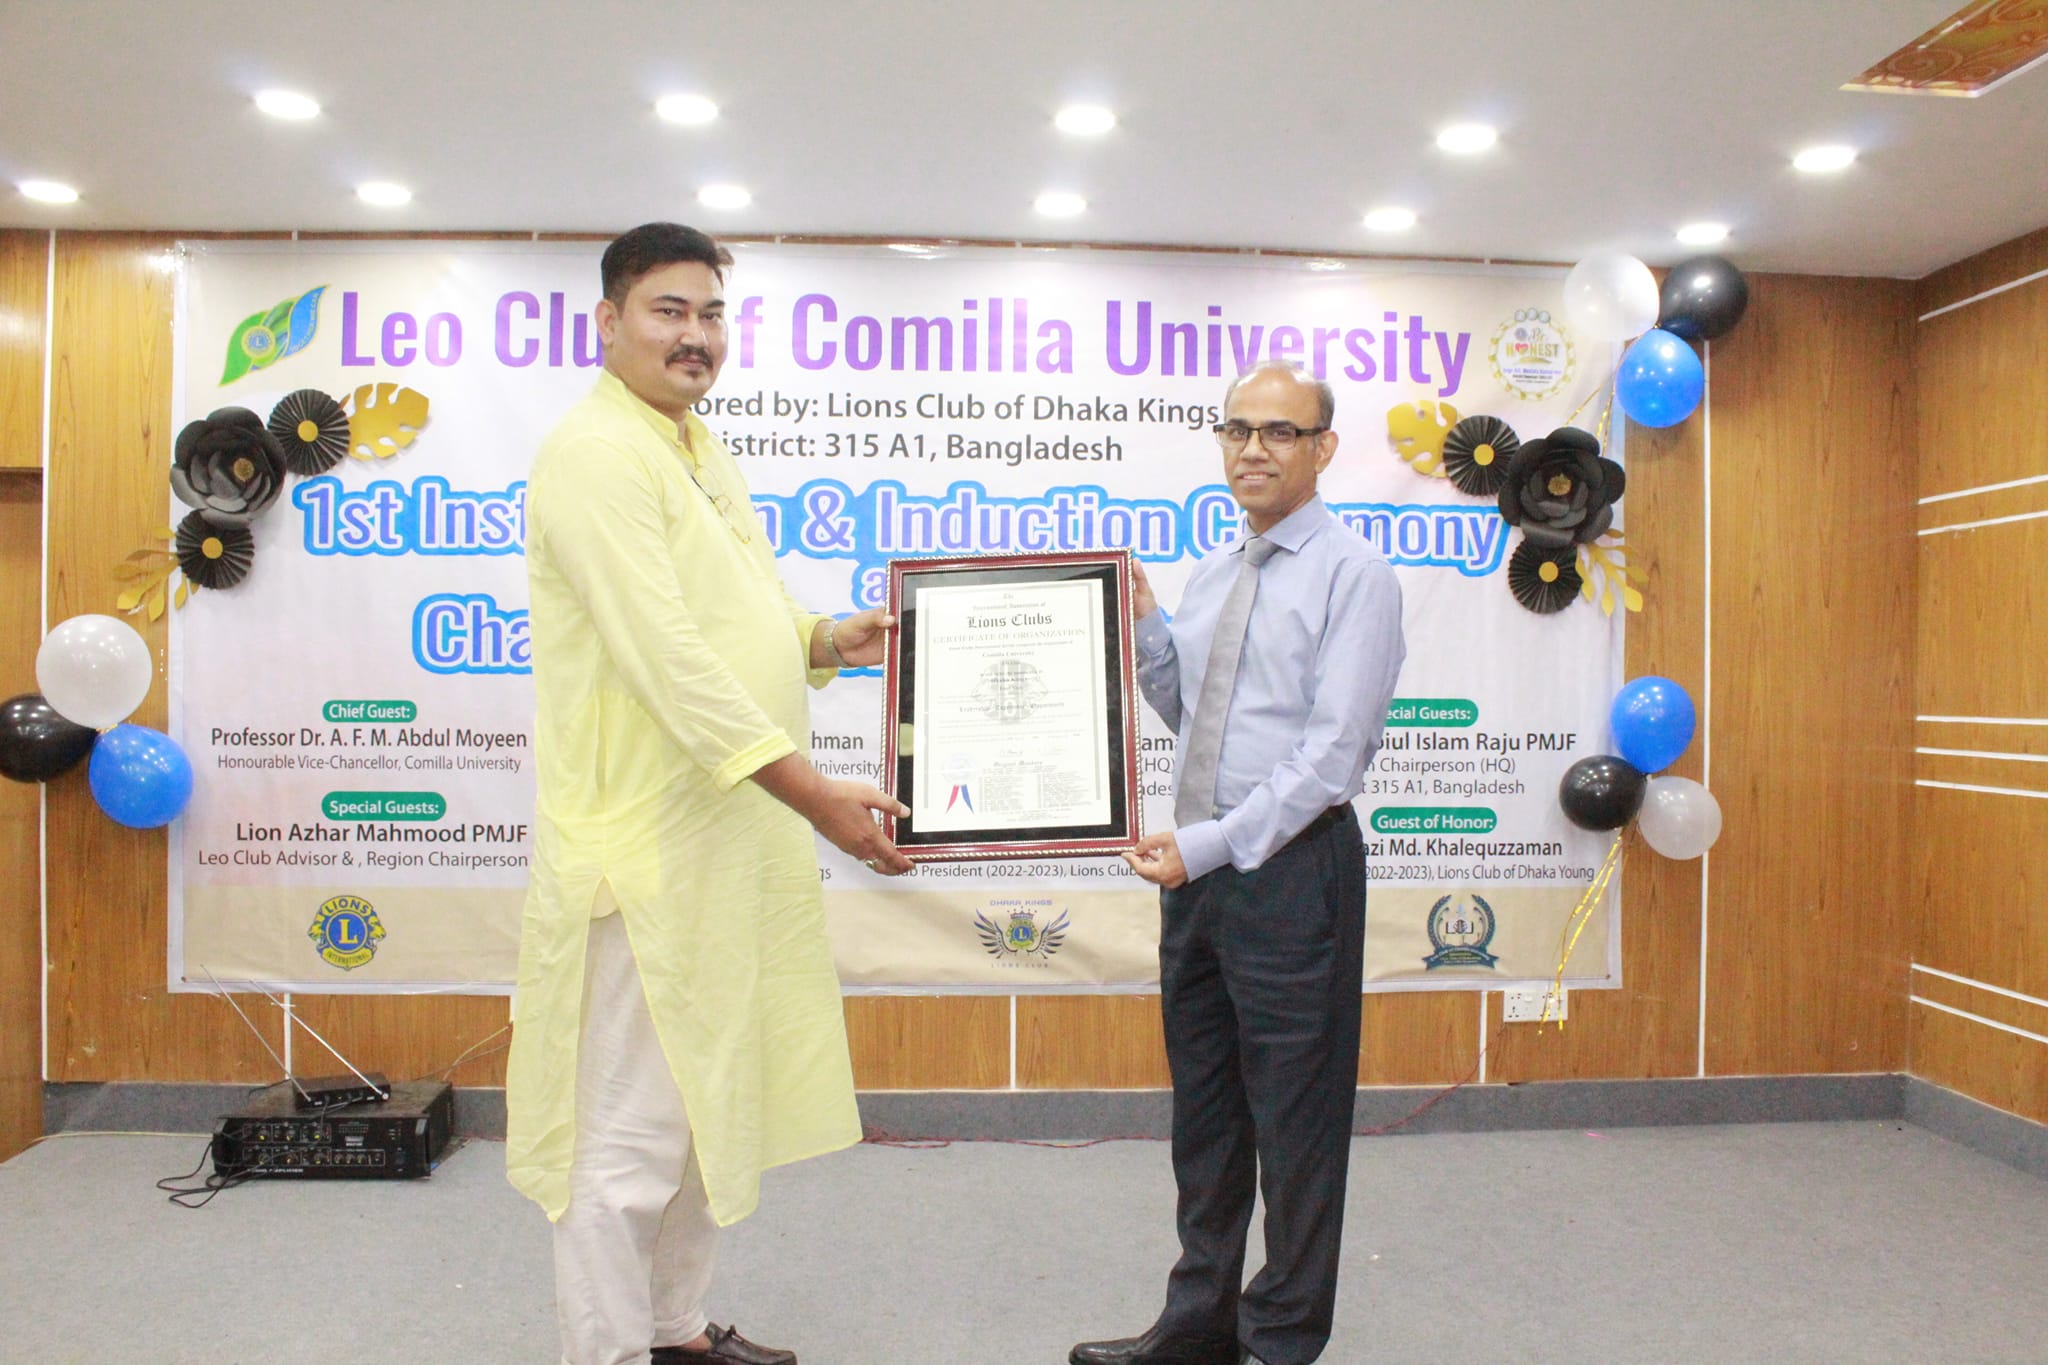 At the moment of handing over the International Charter of Leo Club of Comilla University to Mr. Prof. Dr. AFM Abdul Moin, Honorable Vice Chancellor of Comilla University.